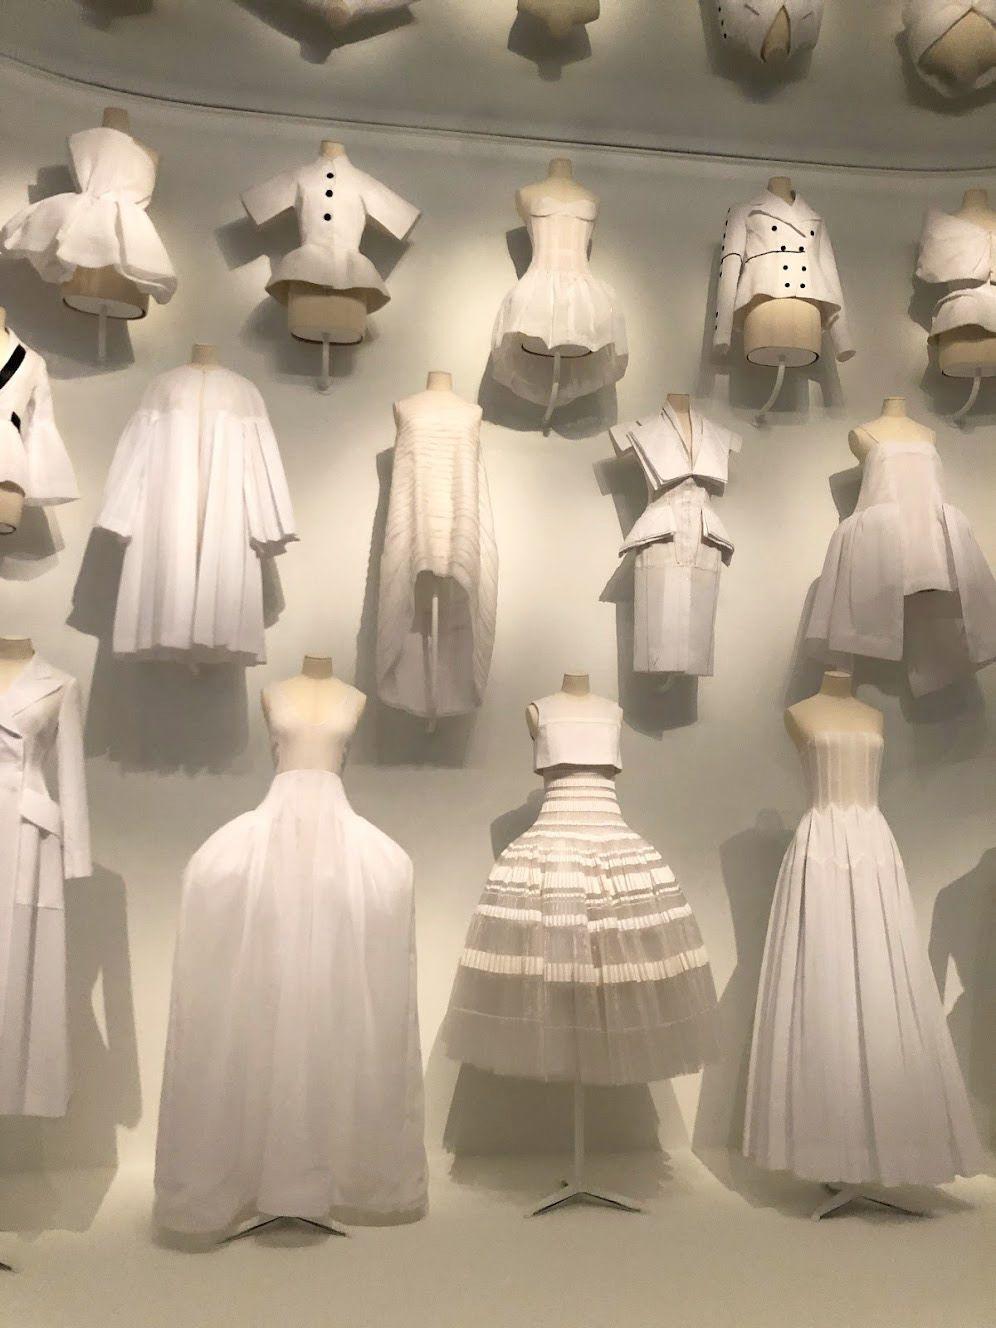 A wall full of white Dior Dresses from a special exhibition at the Dallas Museum of Art.